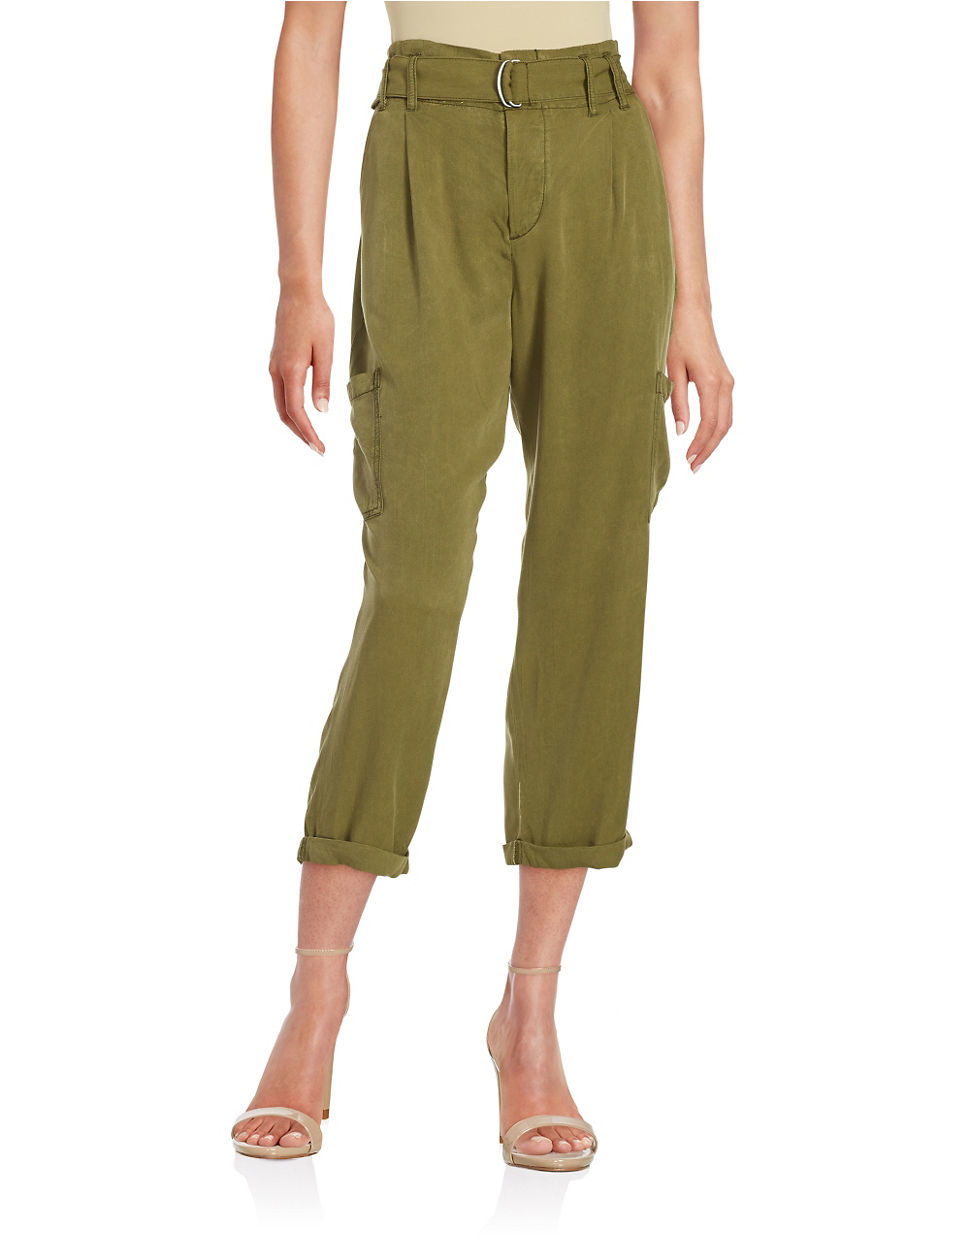 Lyst - Free People Belted Cargo Pants in Green